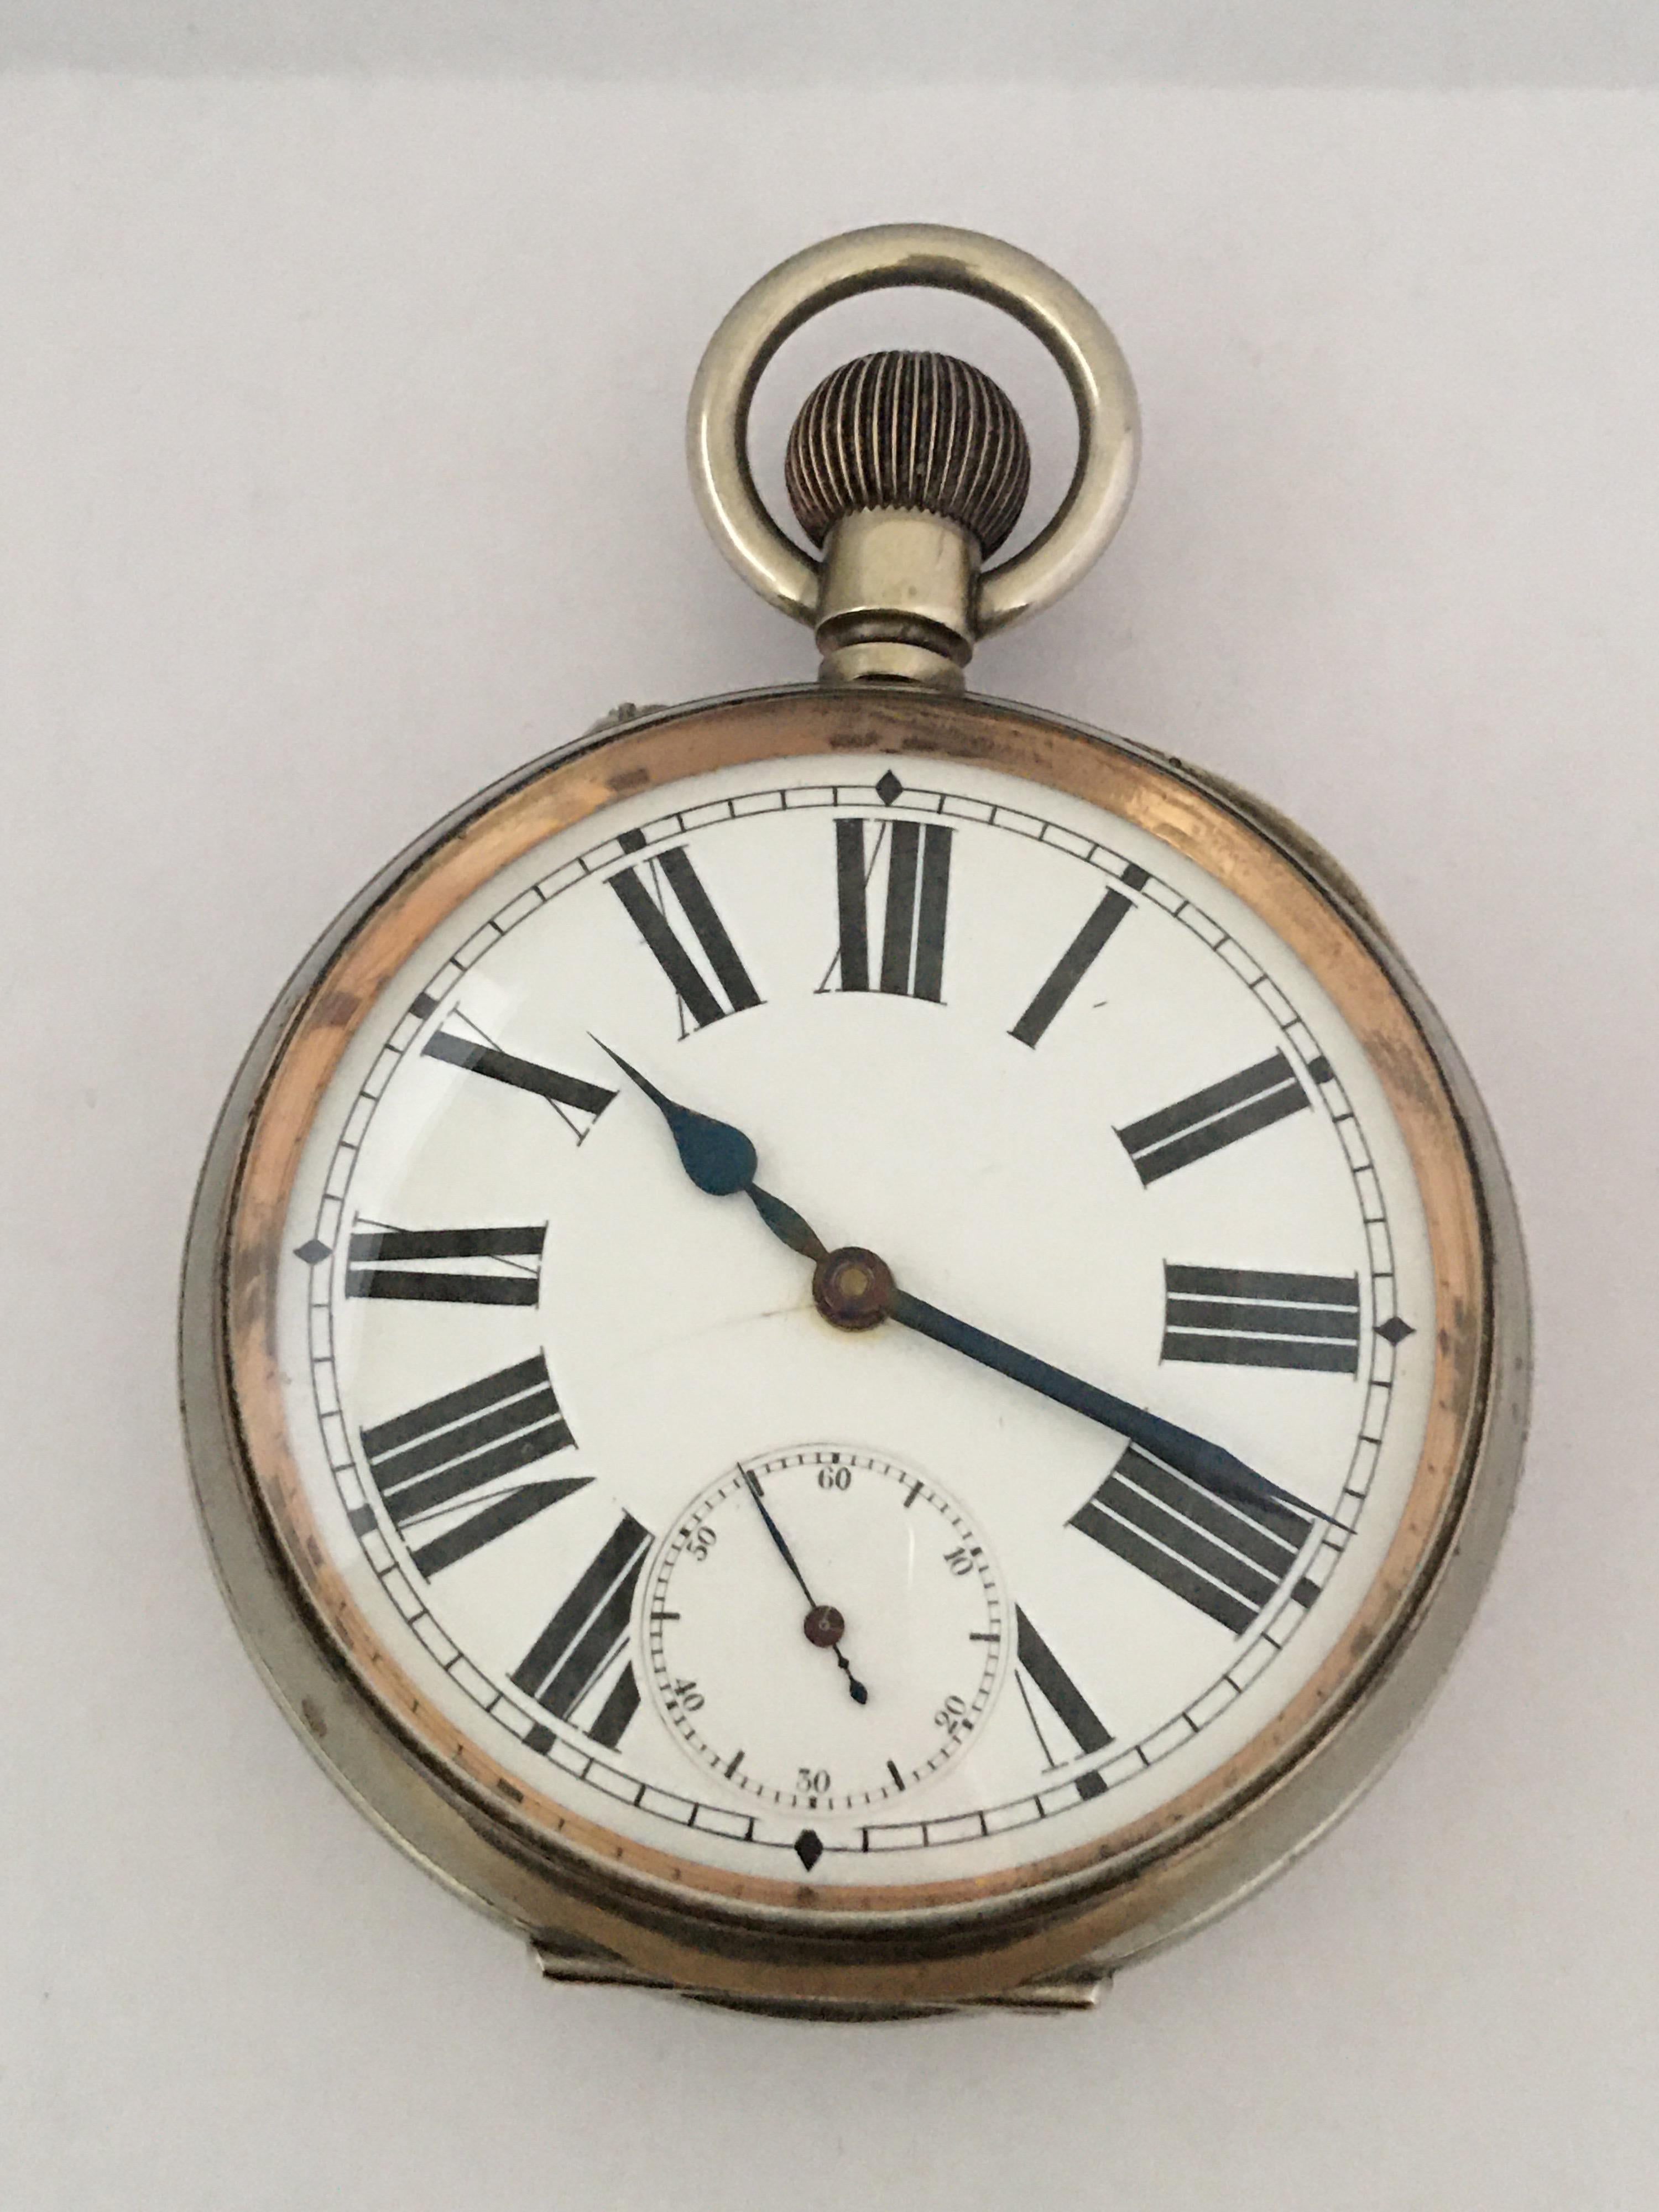 Heavy and Big Antique Silver Plated “Goliath” 8Day Pocket Watch For Sale 7